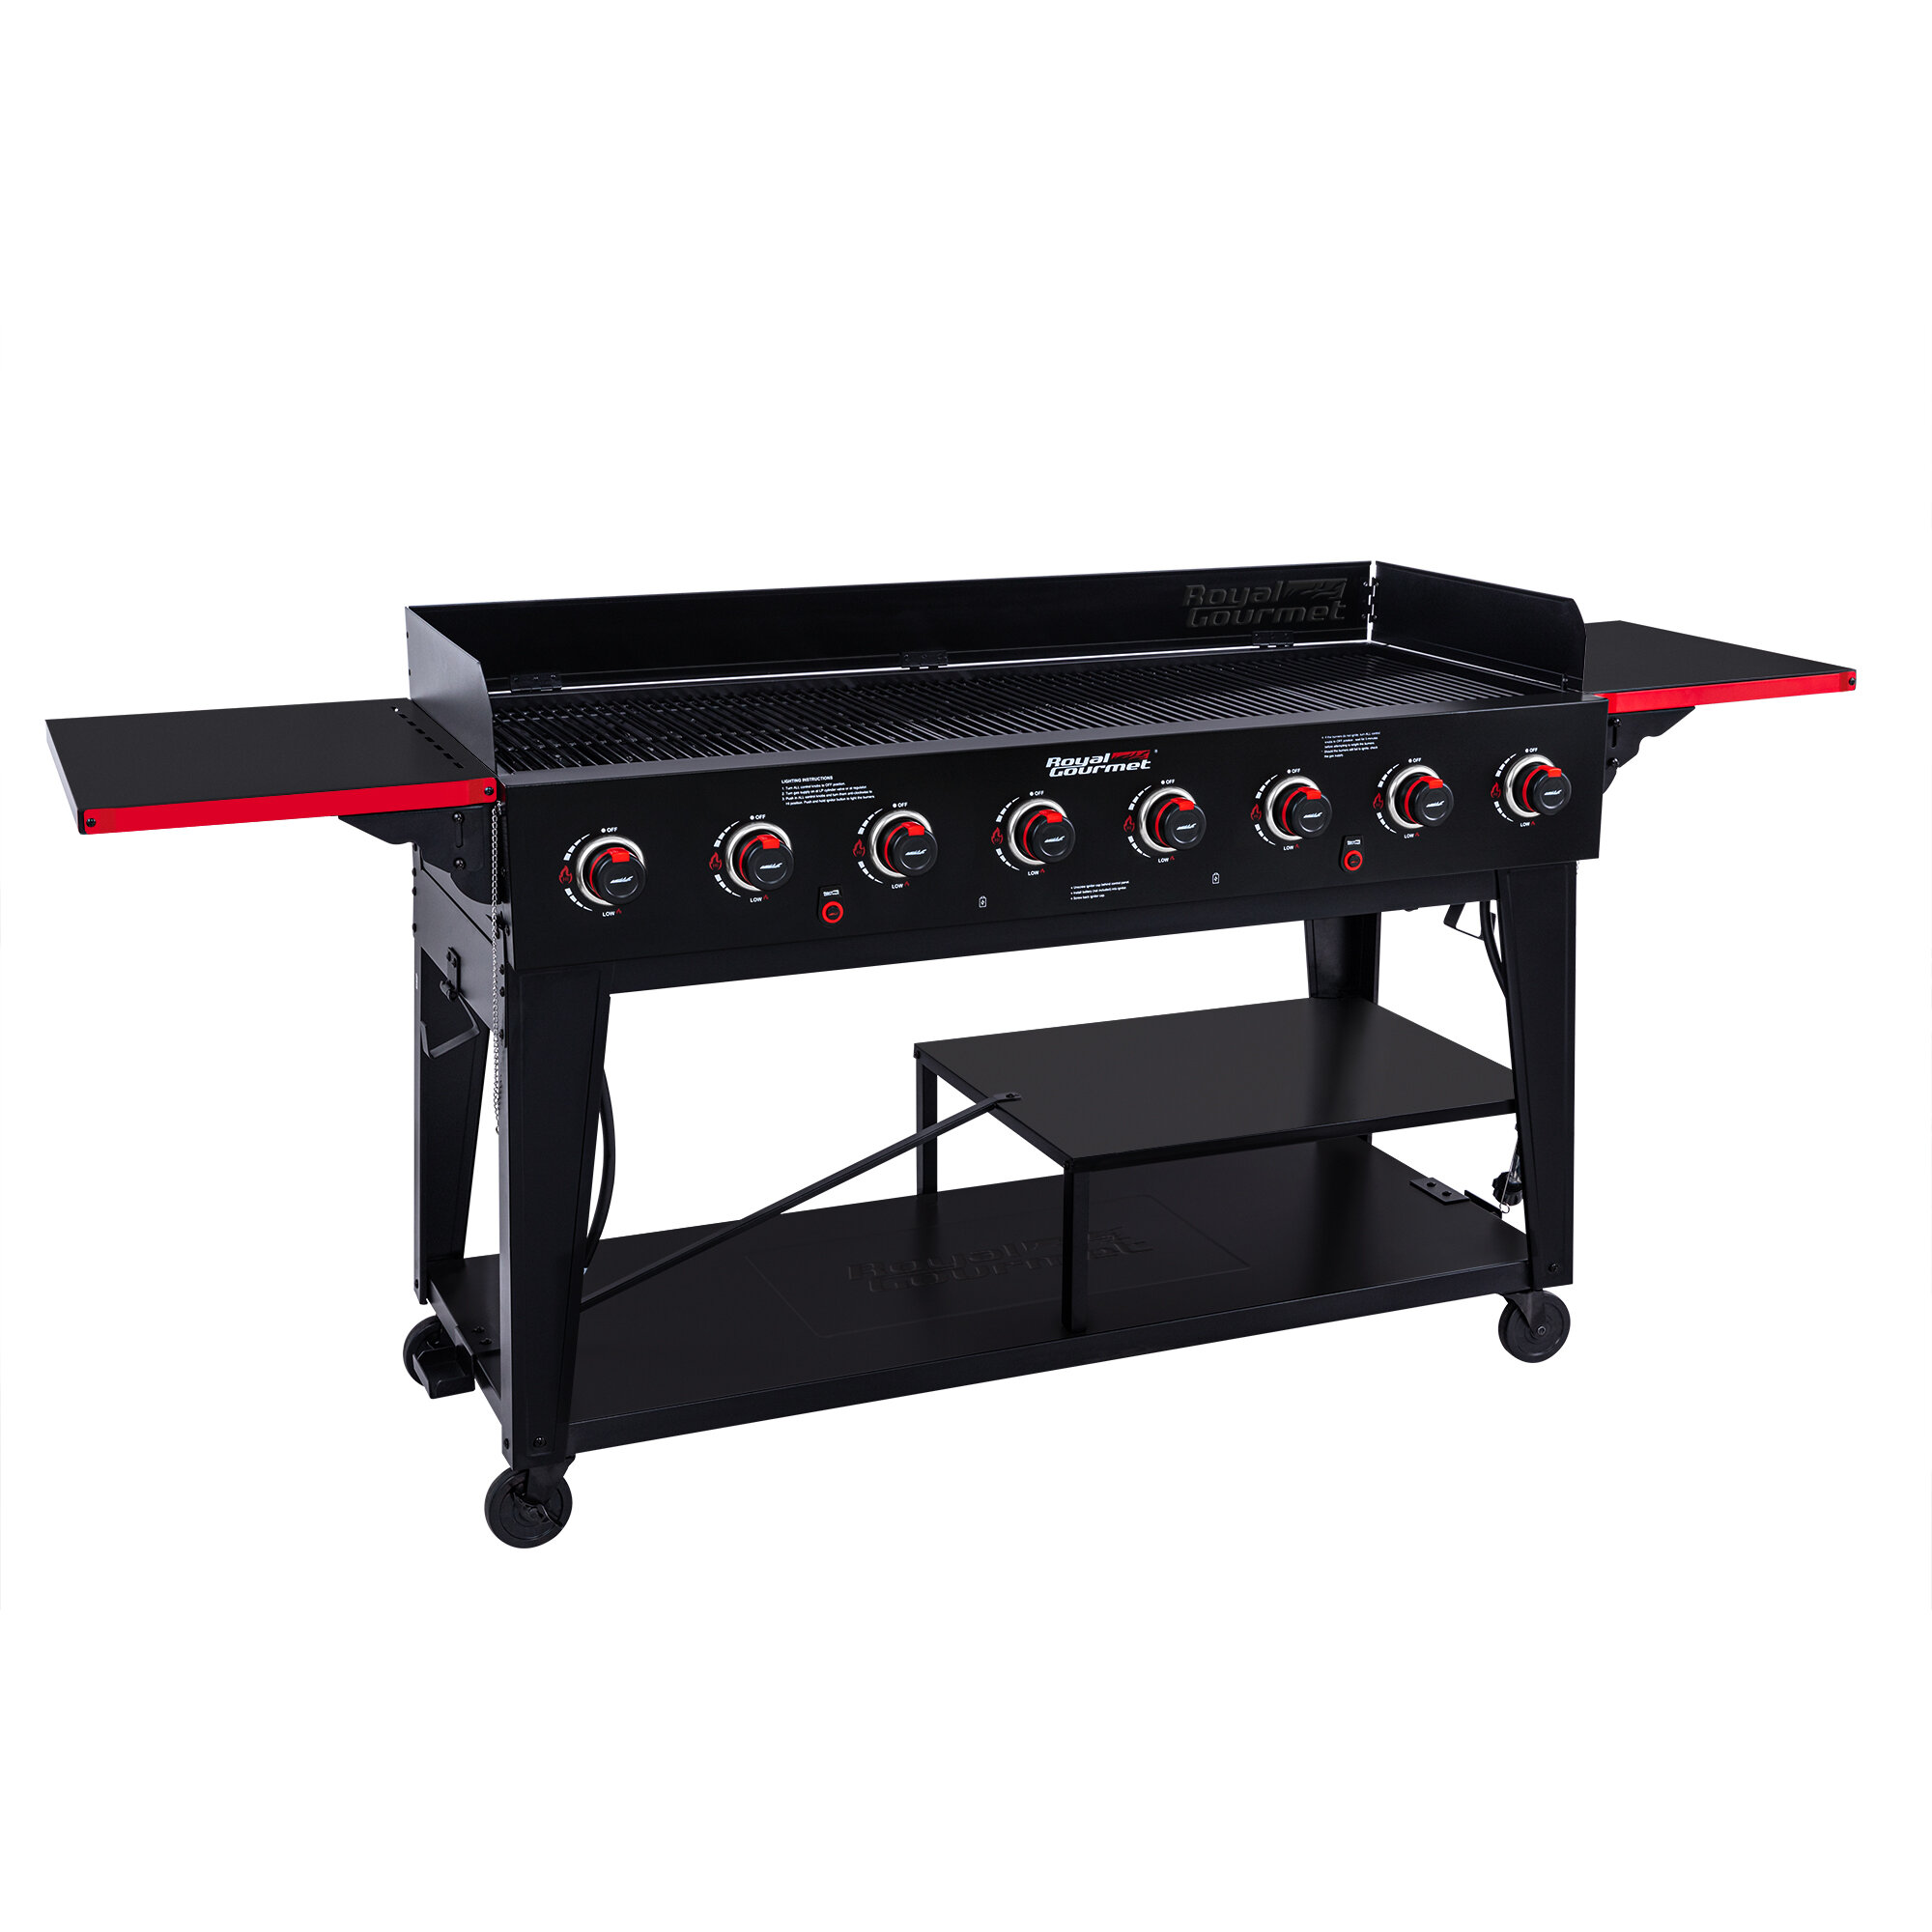 Outdoor 8 Burner BBQ Propane Gas Grill with Cover and Grilling